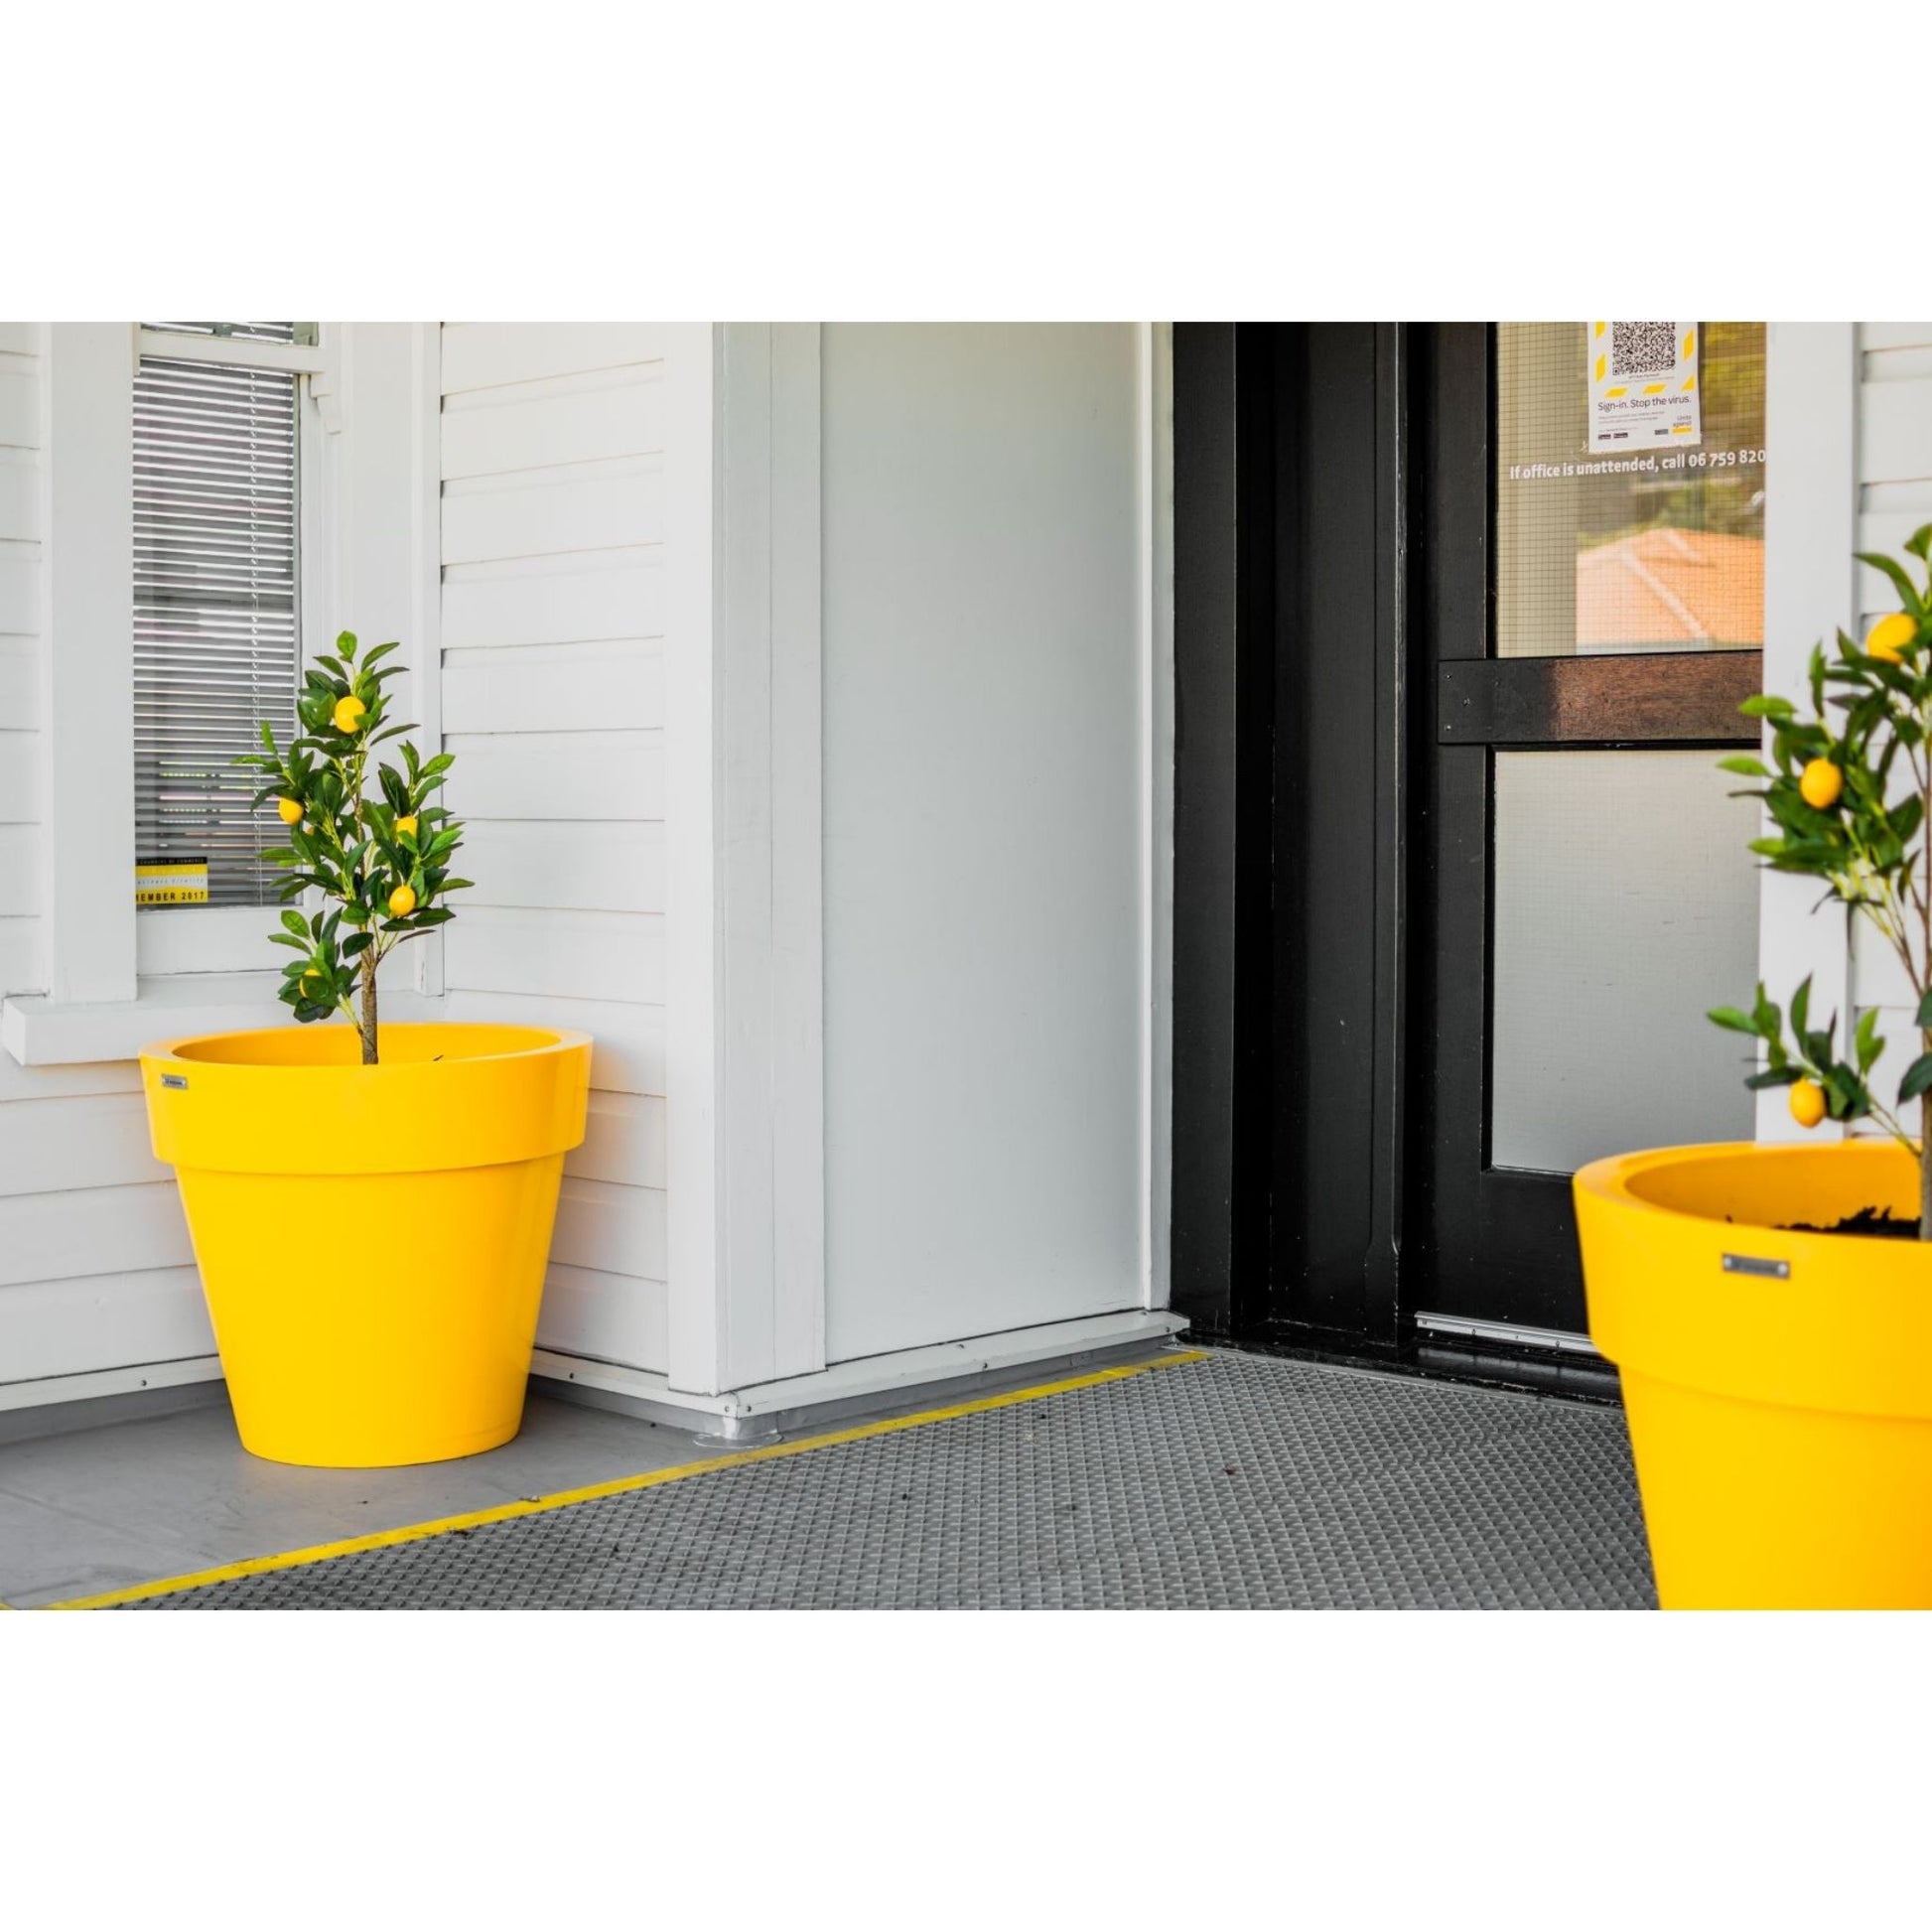 A villa entrance with two yellow planter pots by it. The pots have citrus trees planted in them.